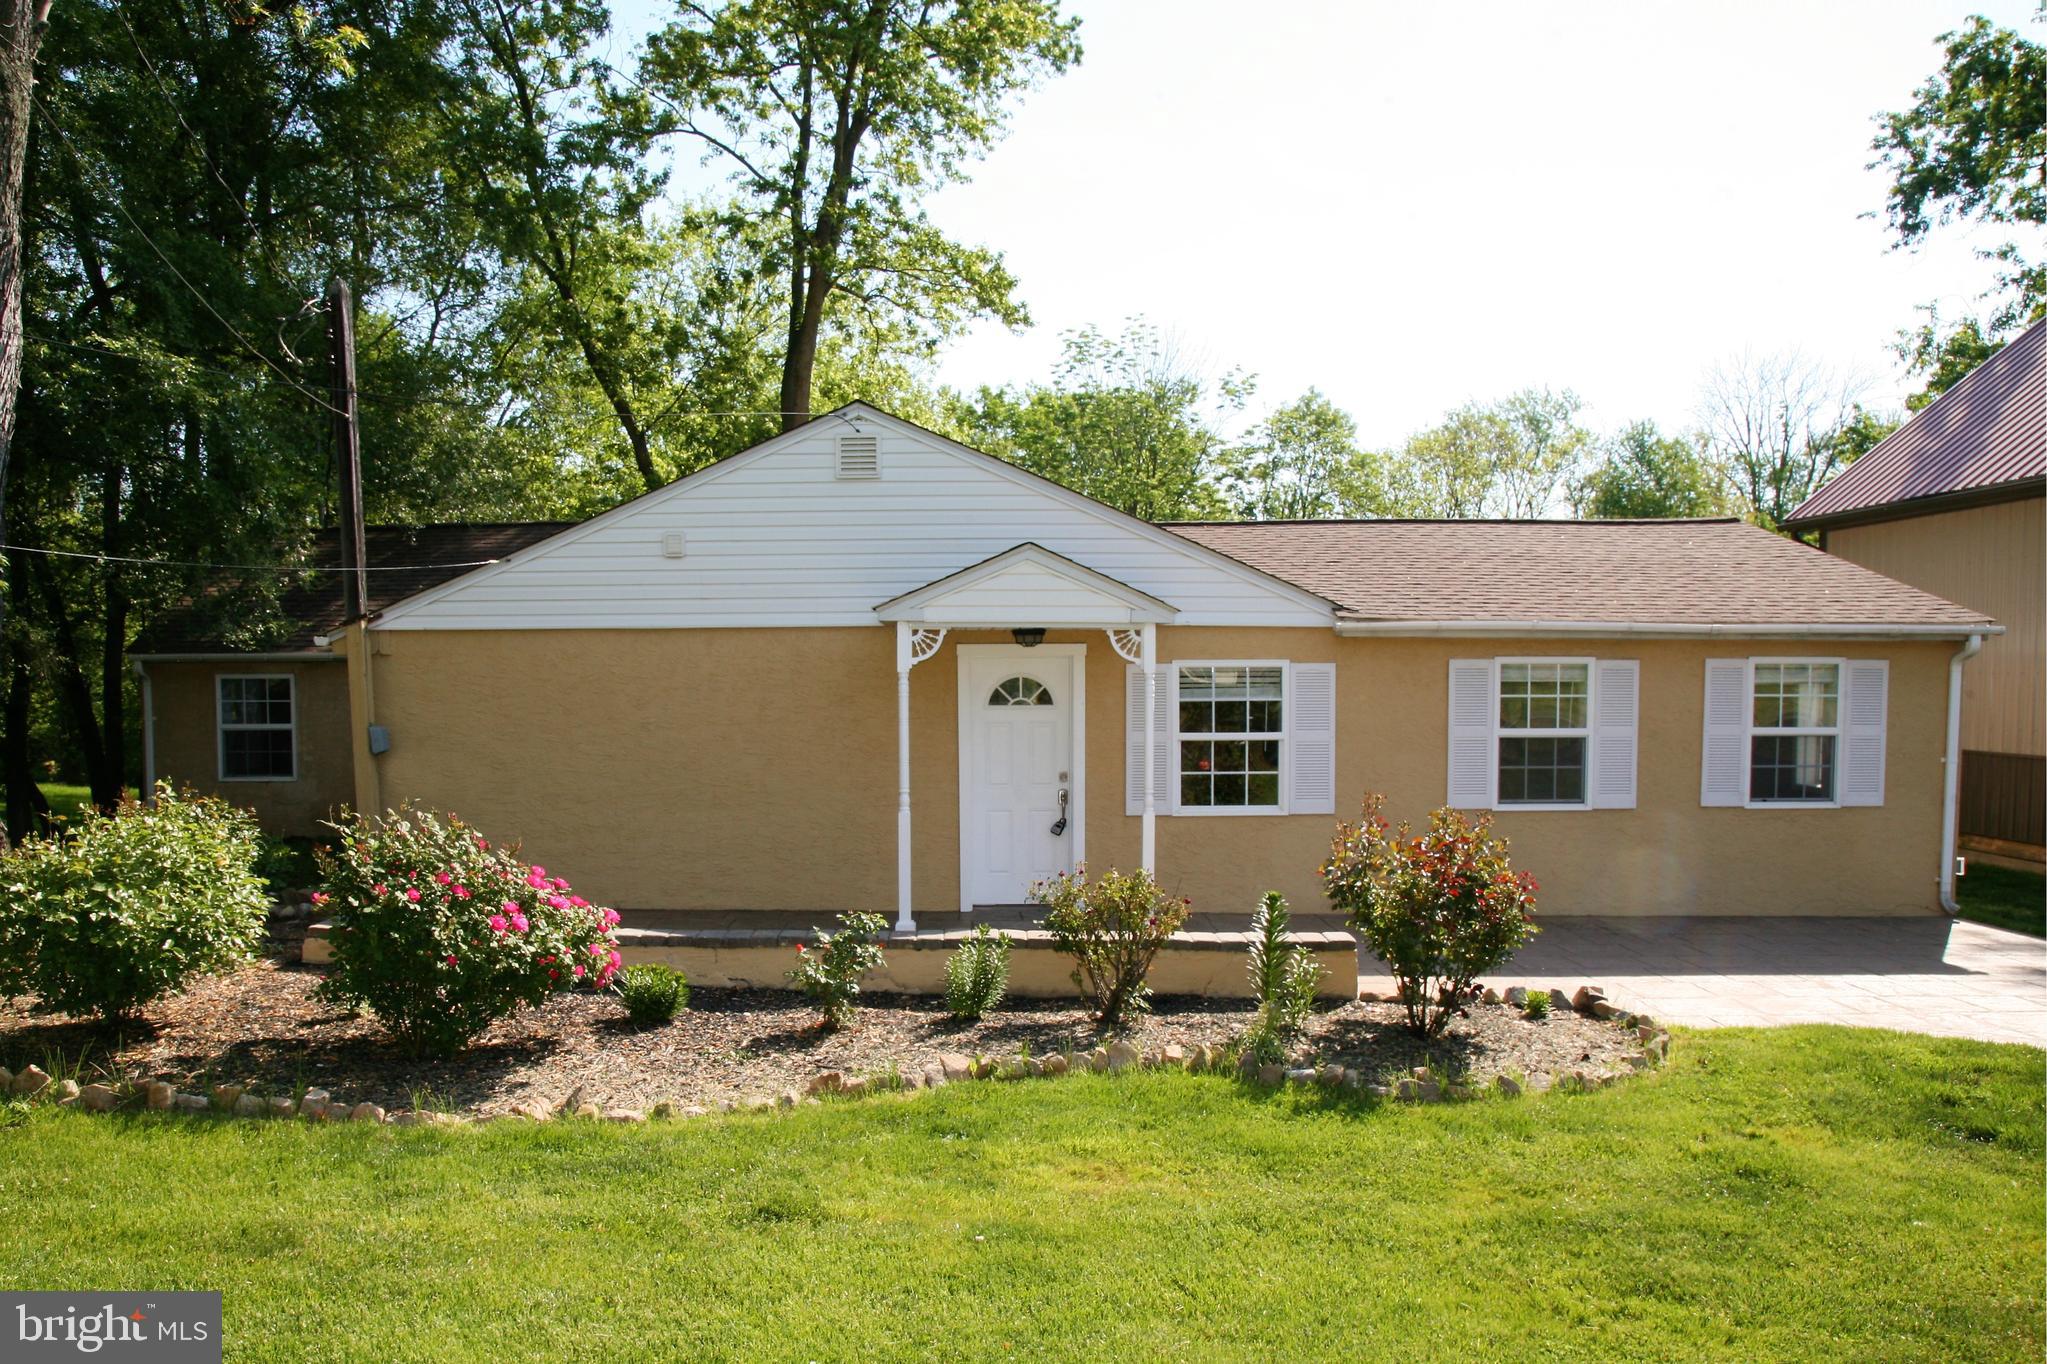 a front view of house with yard and outdoor seating